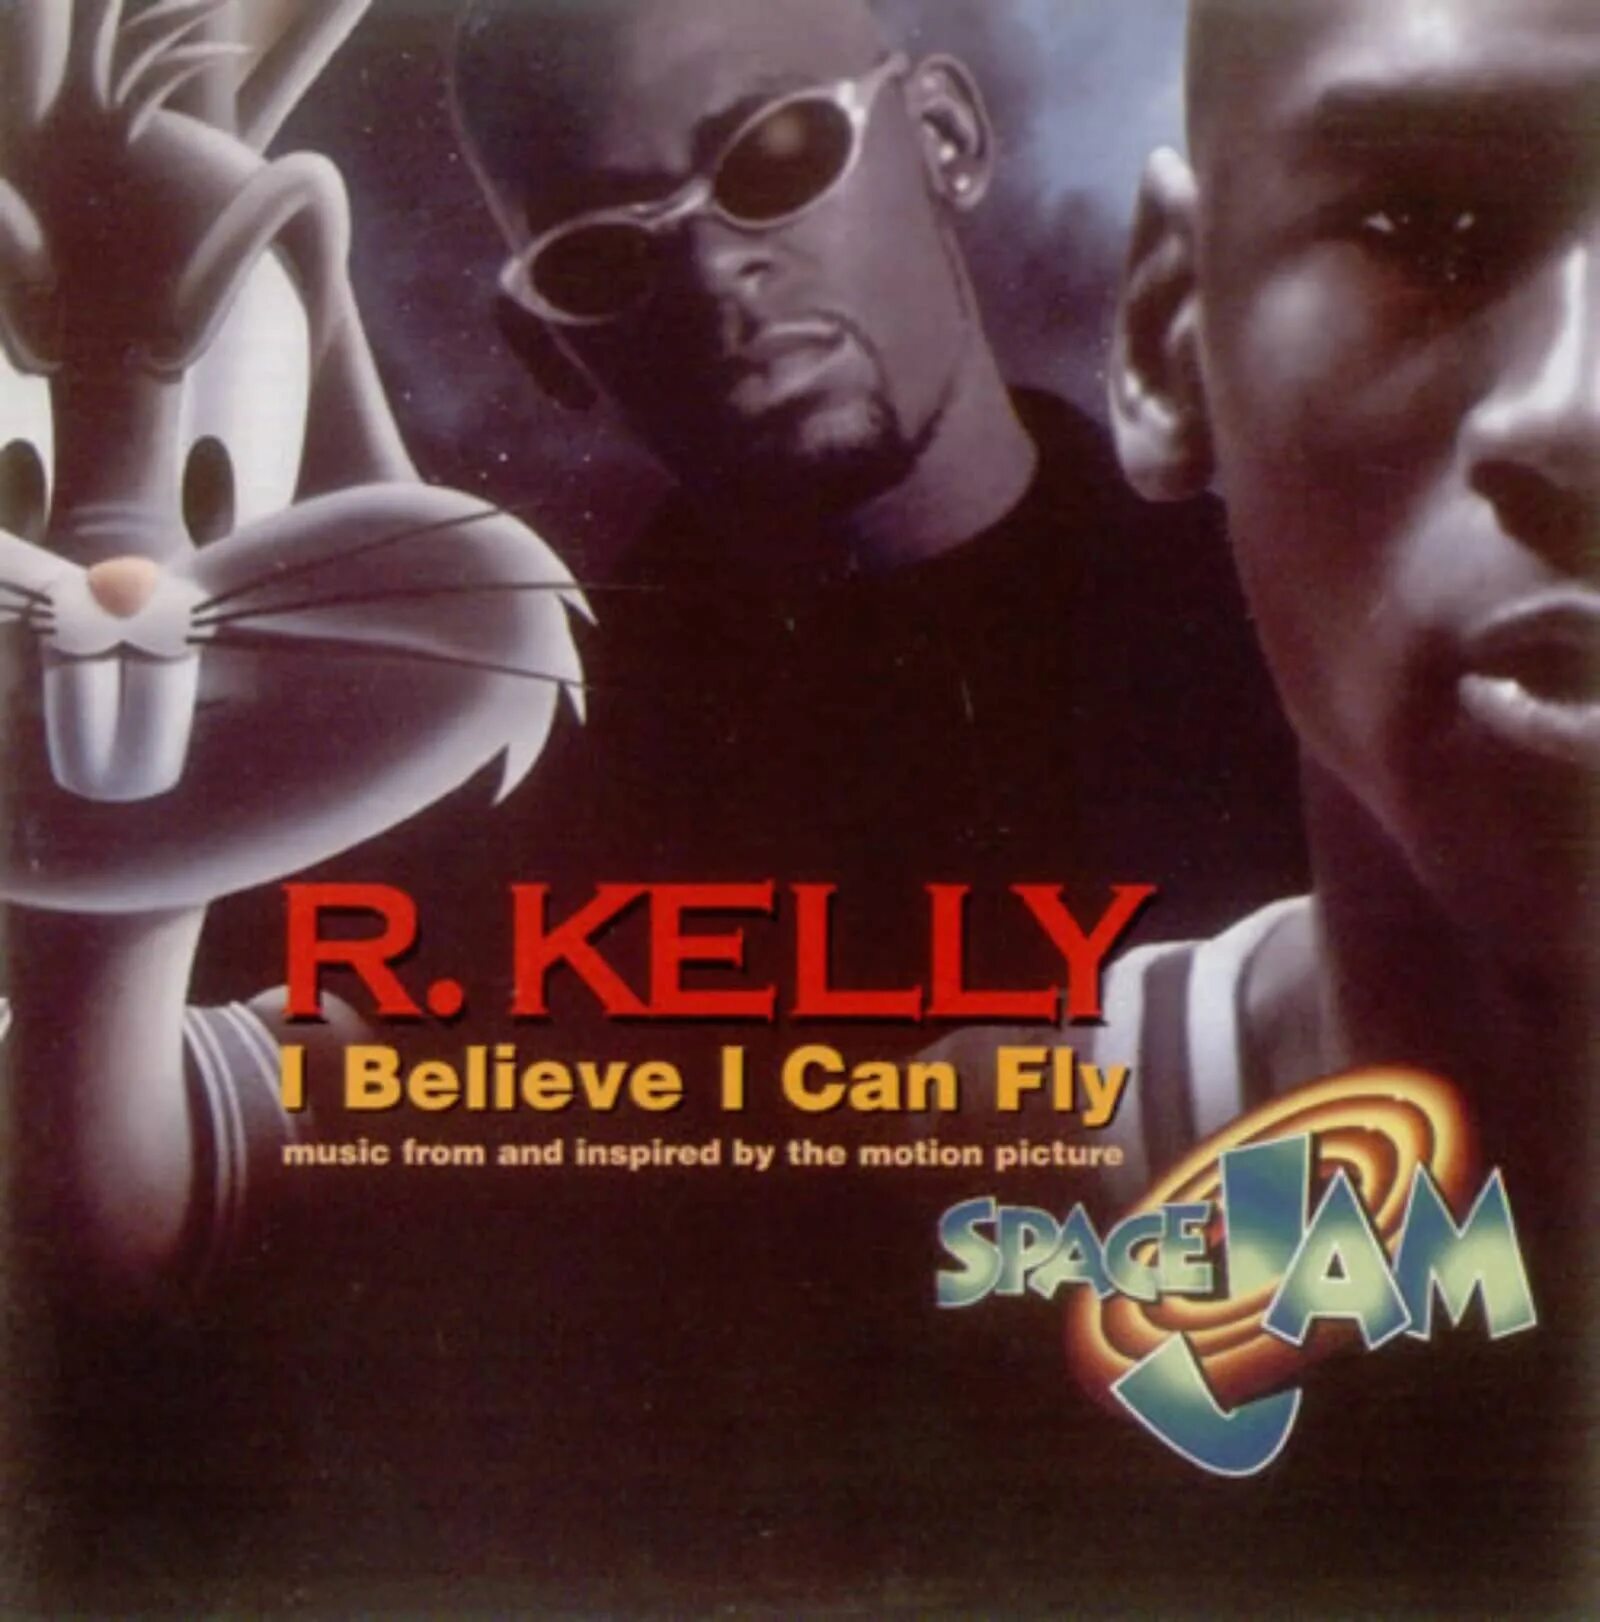 I believe i can текст. R Kelly i believe i can. Келли i believe i can Fly. I believe i can Fly ар Келли. I believe can Fly r Kelly.